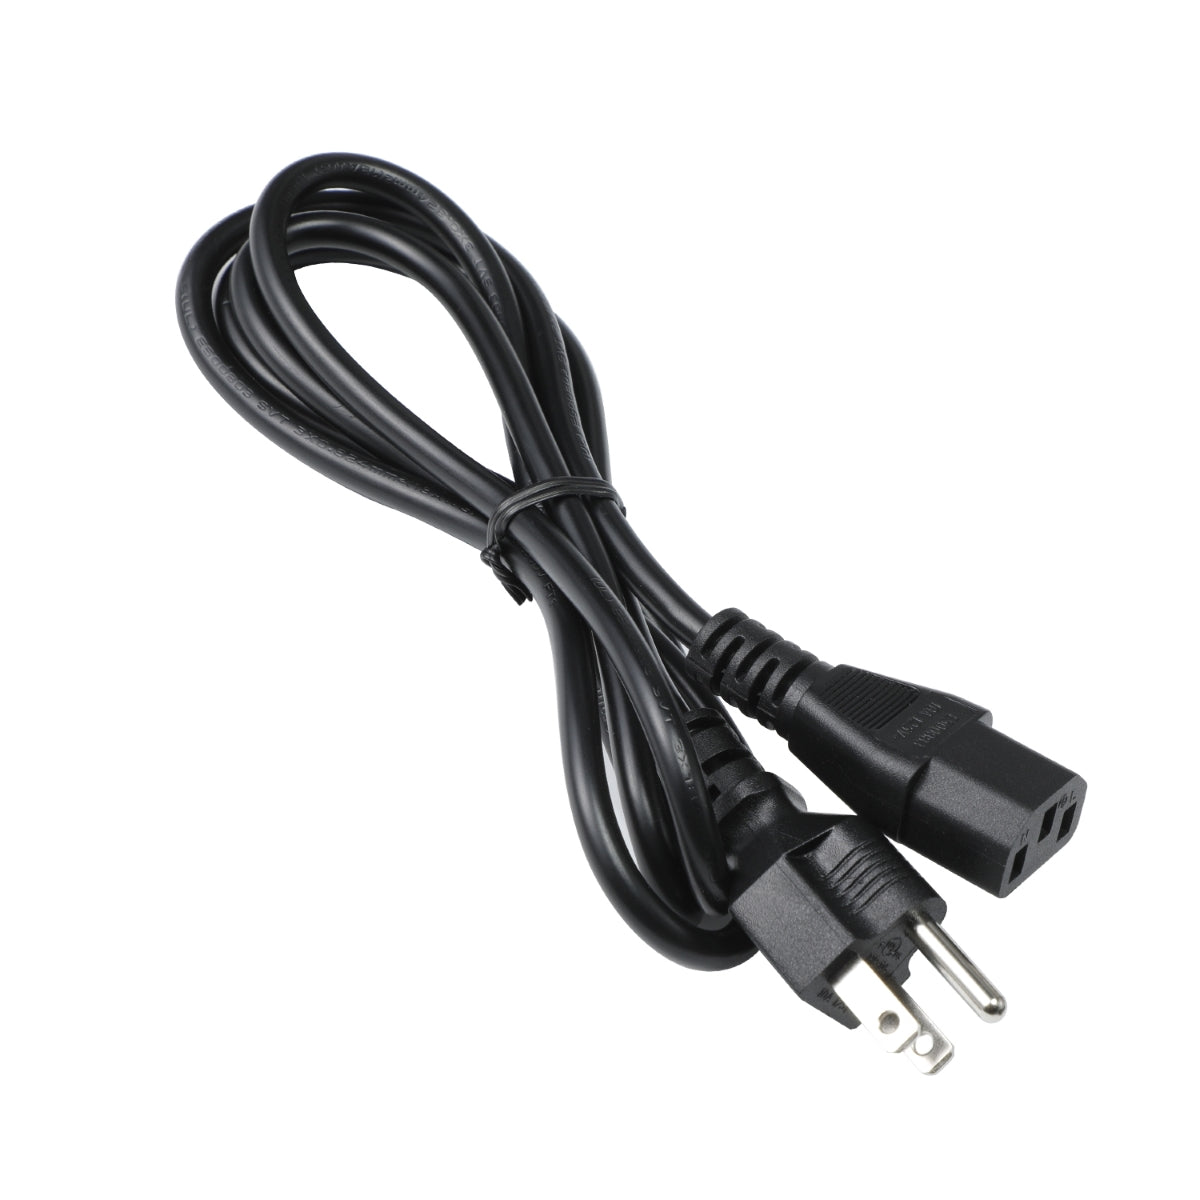 Power Cable for Philips BDM4350UC Monitor.